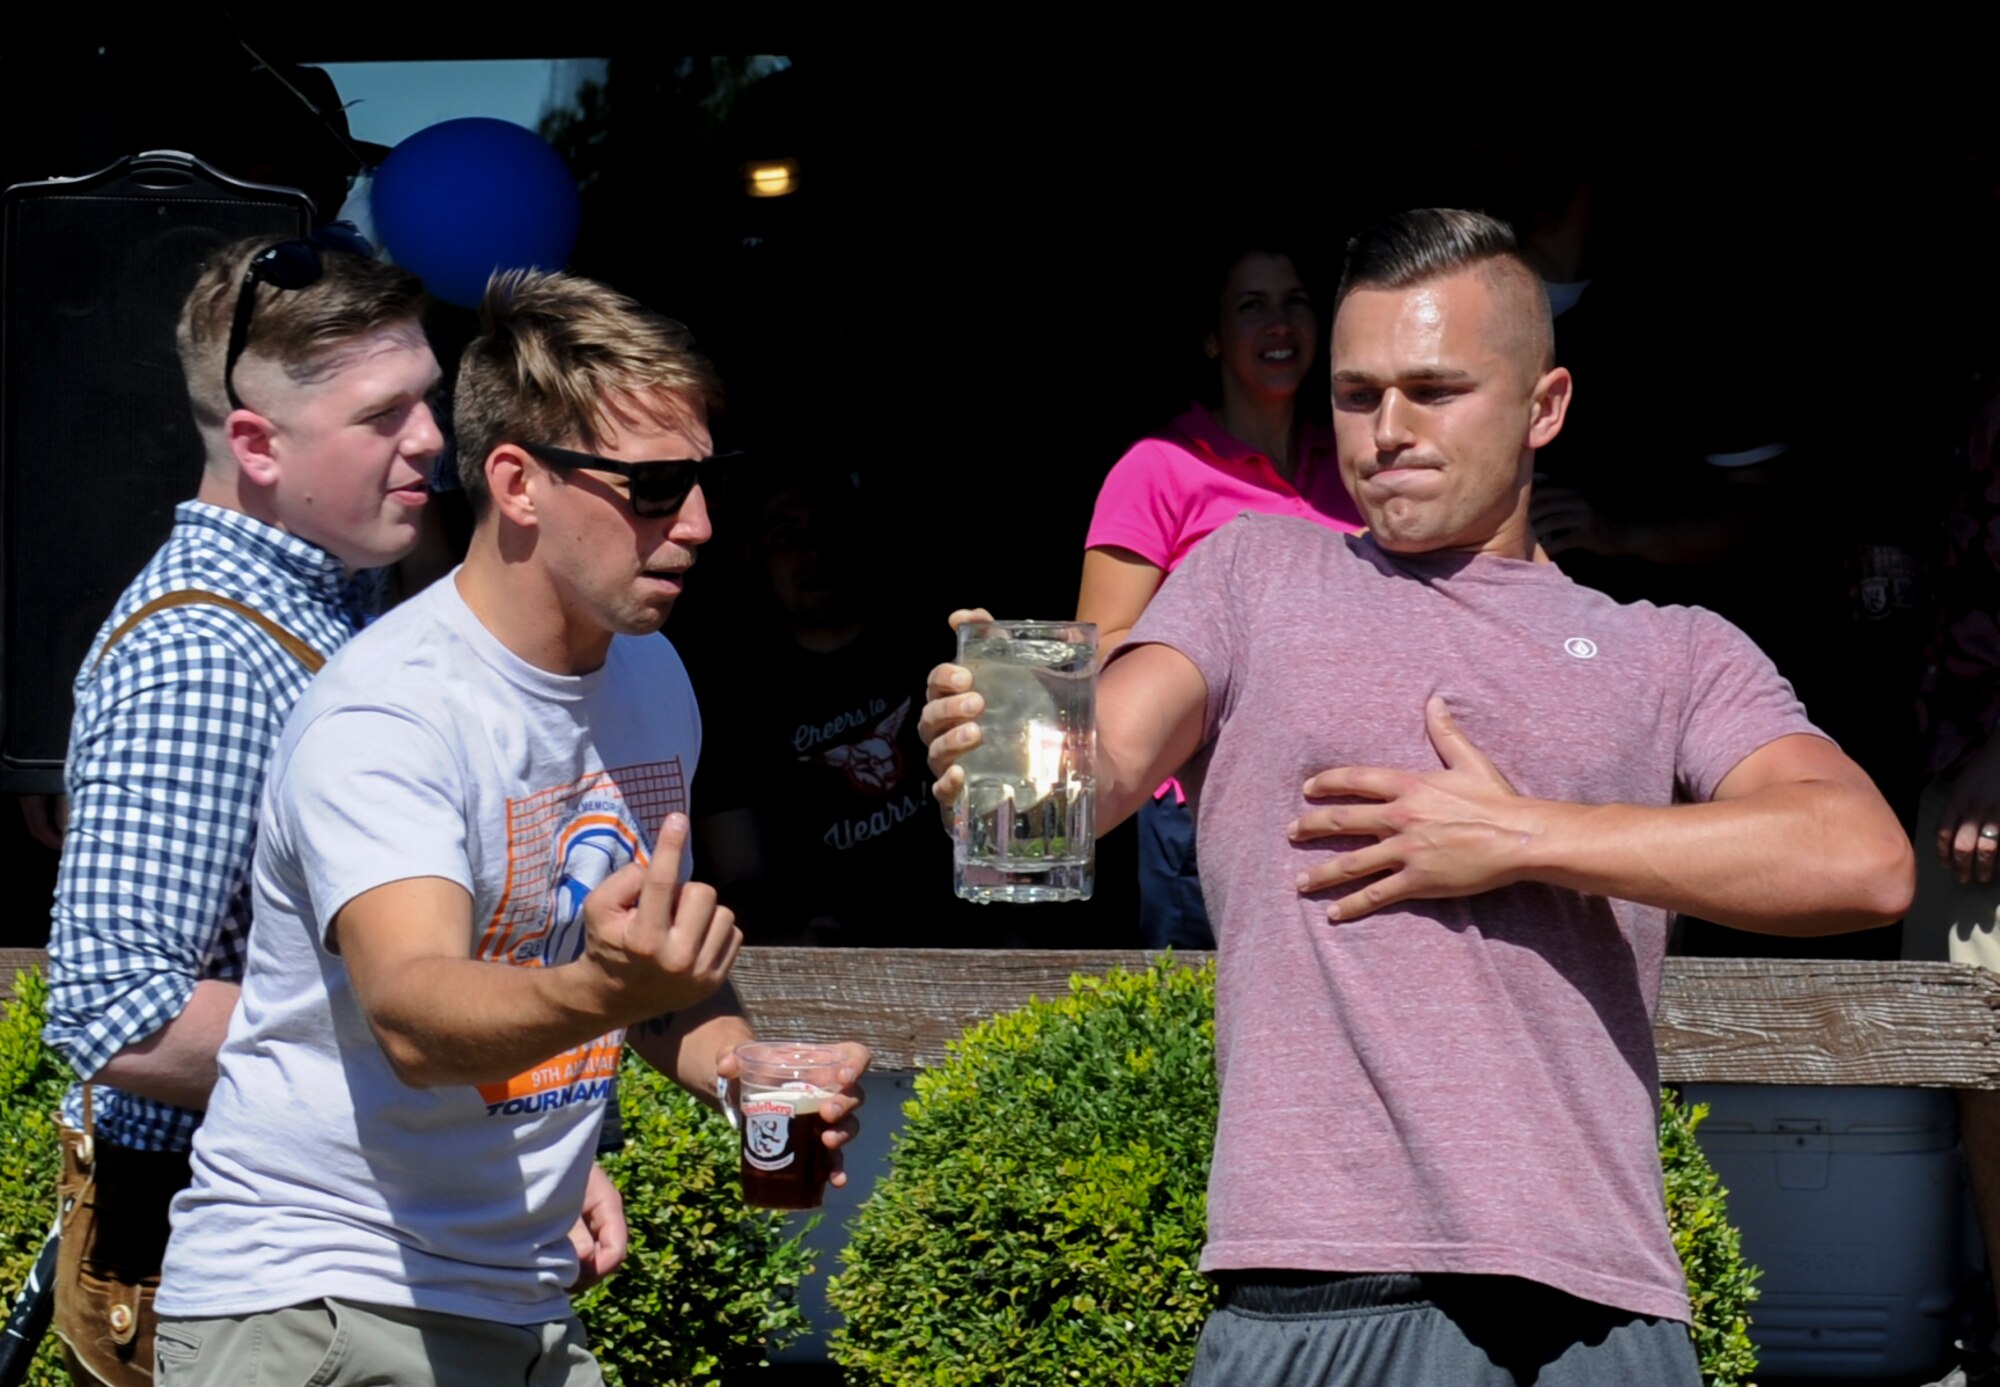 Senior Airmen Hunter Moore and Jason Fertig, National Air and Space Intelligence Center members, compete in the stein raising event during NASIC’s annual Oktoberfest at Bass Lake, Wright-Patterson Air Force Base, Ohio on Sep. 27, 2019. During the event, participants are challenged to see who holds their stein up the longest. (U.S. Air Force photo by Senior Airman Samuel Earick/Released)